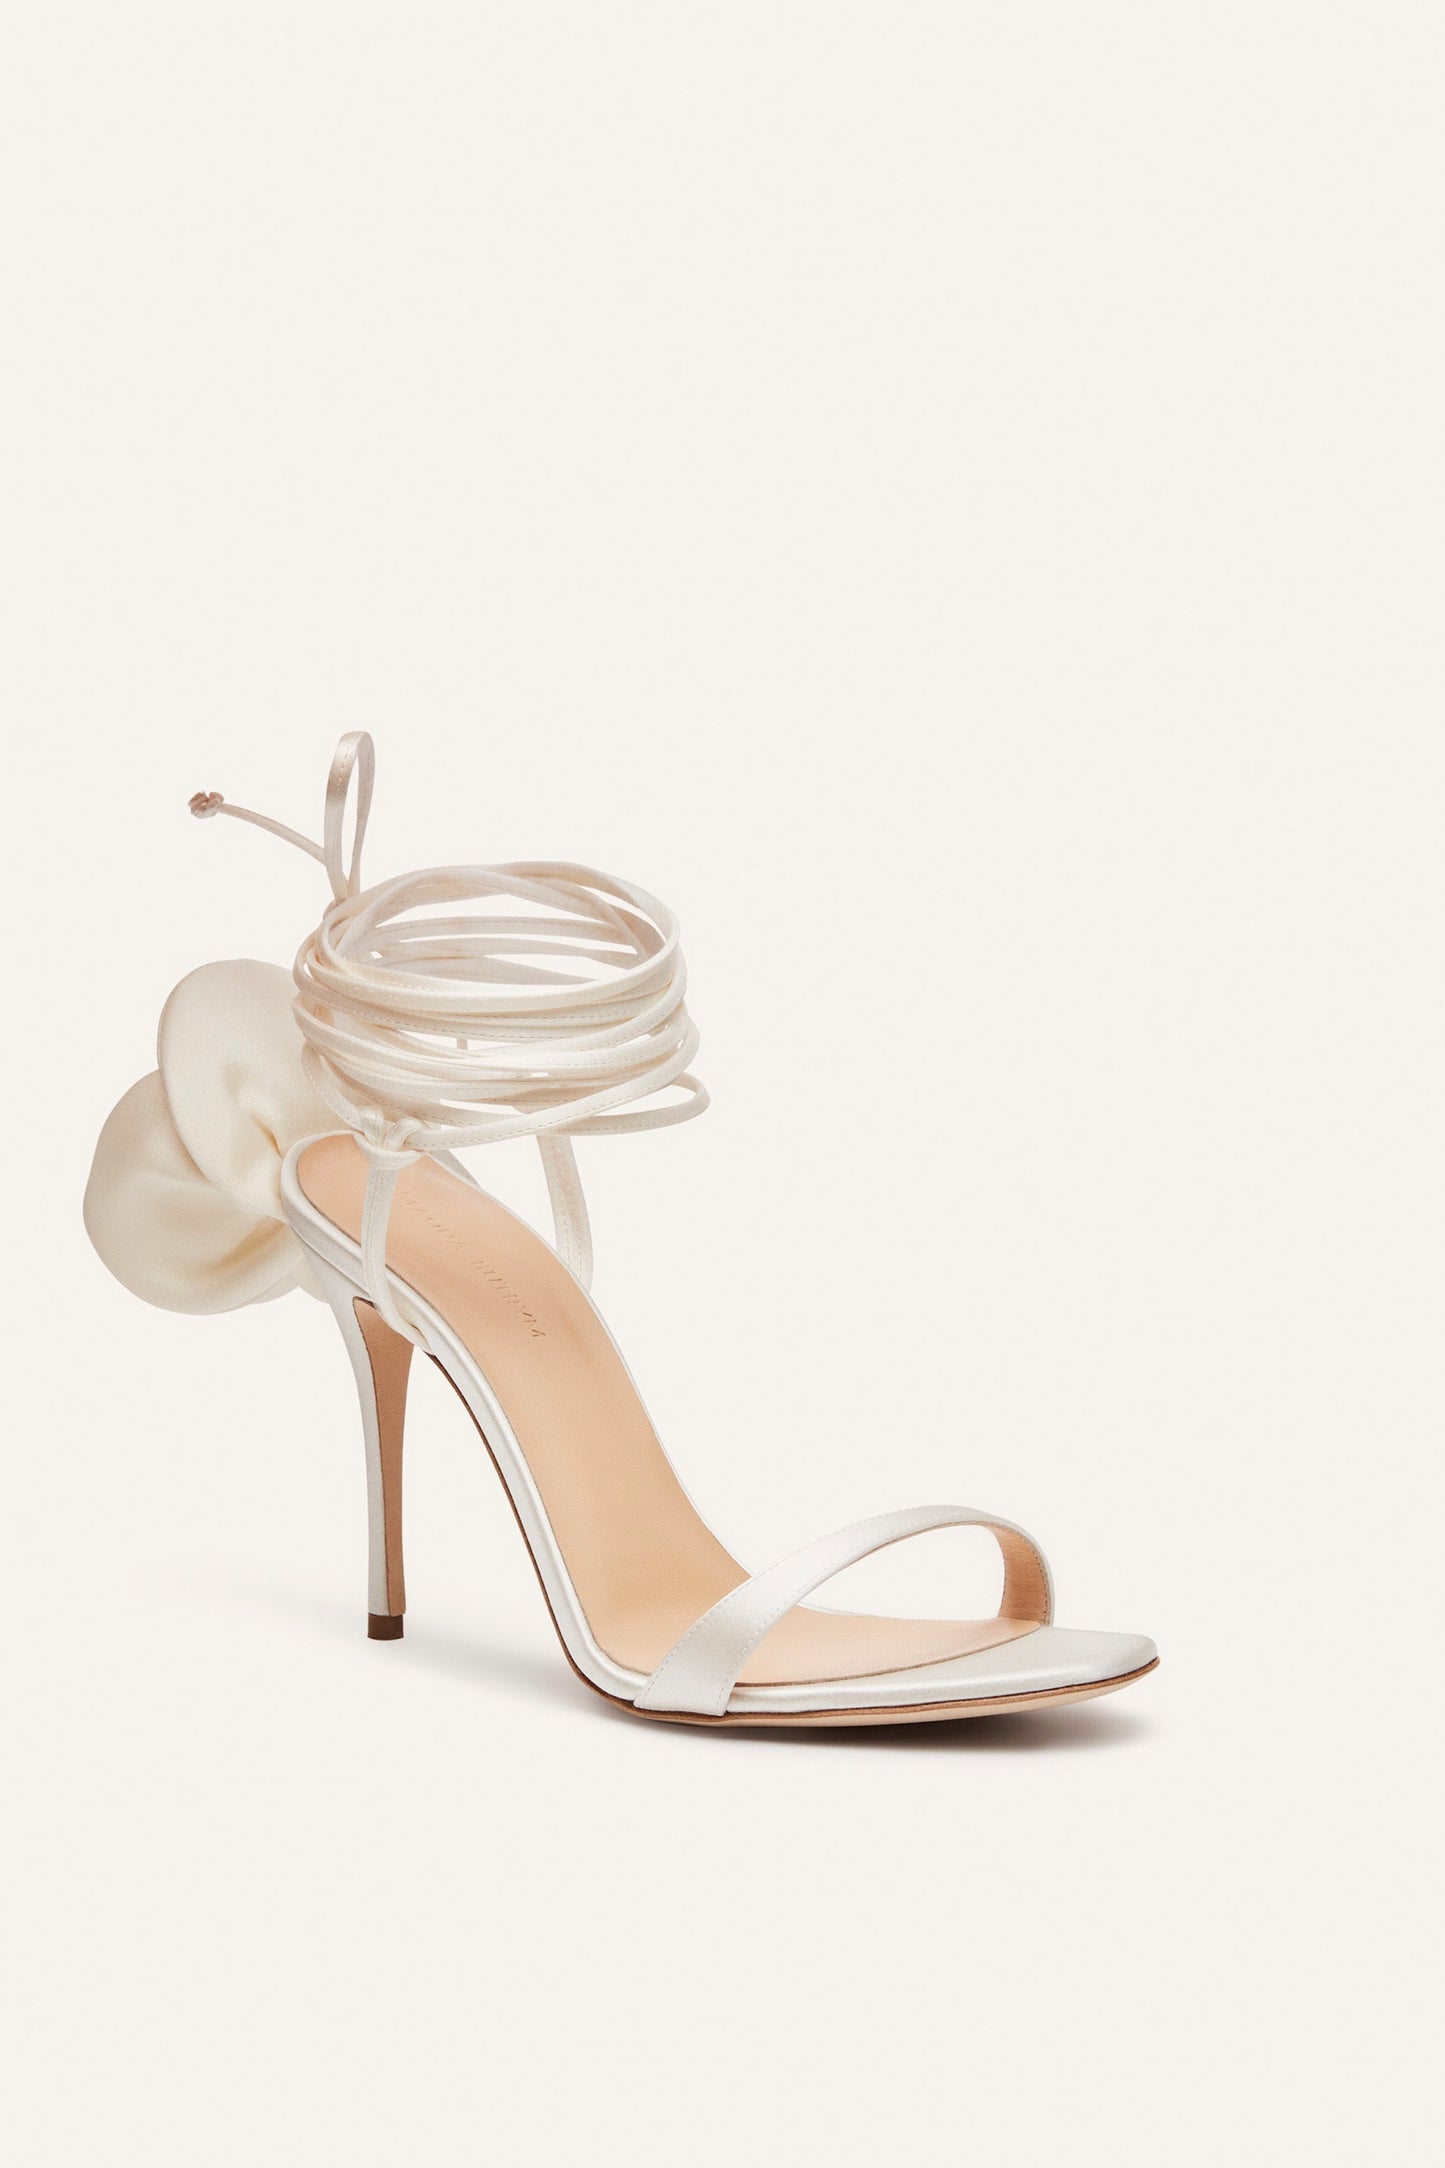 FLOWER SHOES IVORY SATIN